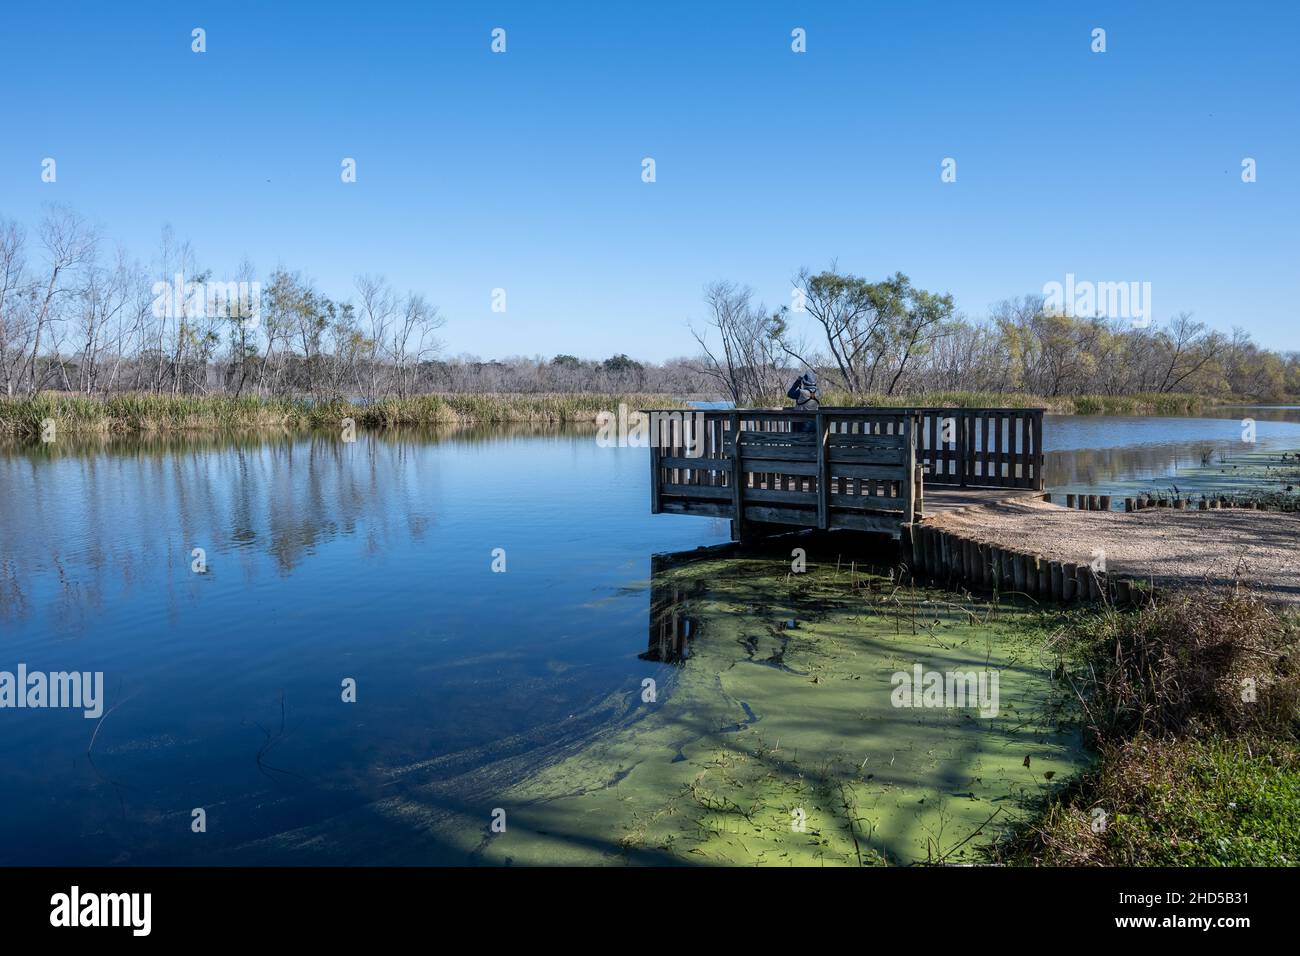 A bird watcher searching for bird on a wooden deck by the lake. Brazos Bend State Park. Needville, Texas, USA. Stock Photo